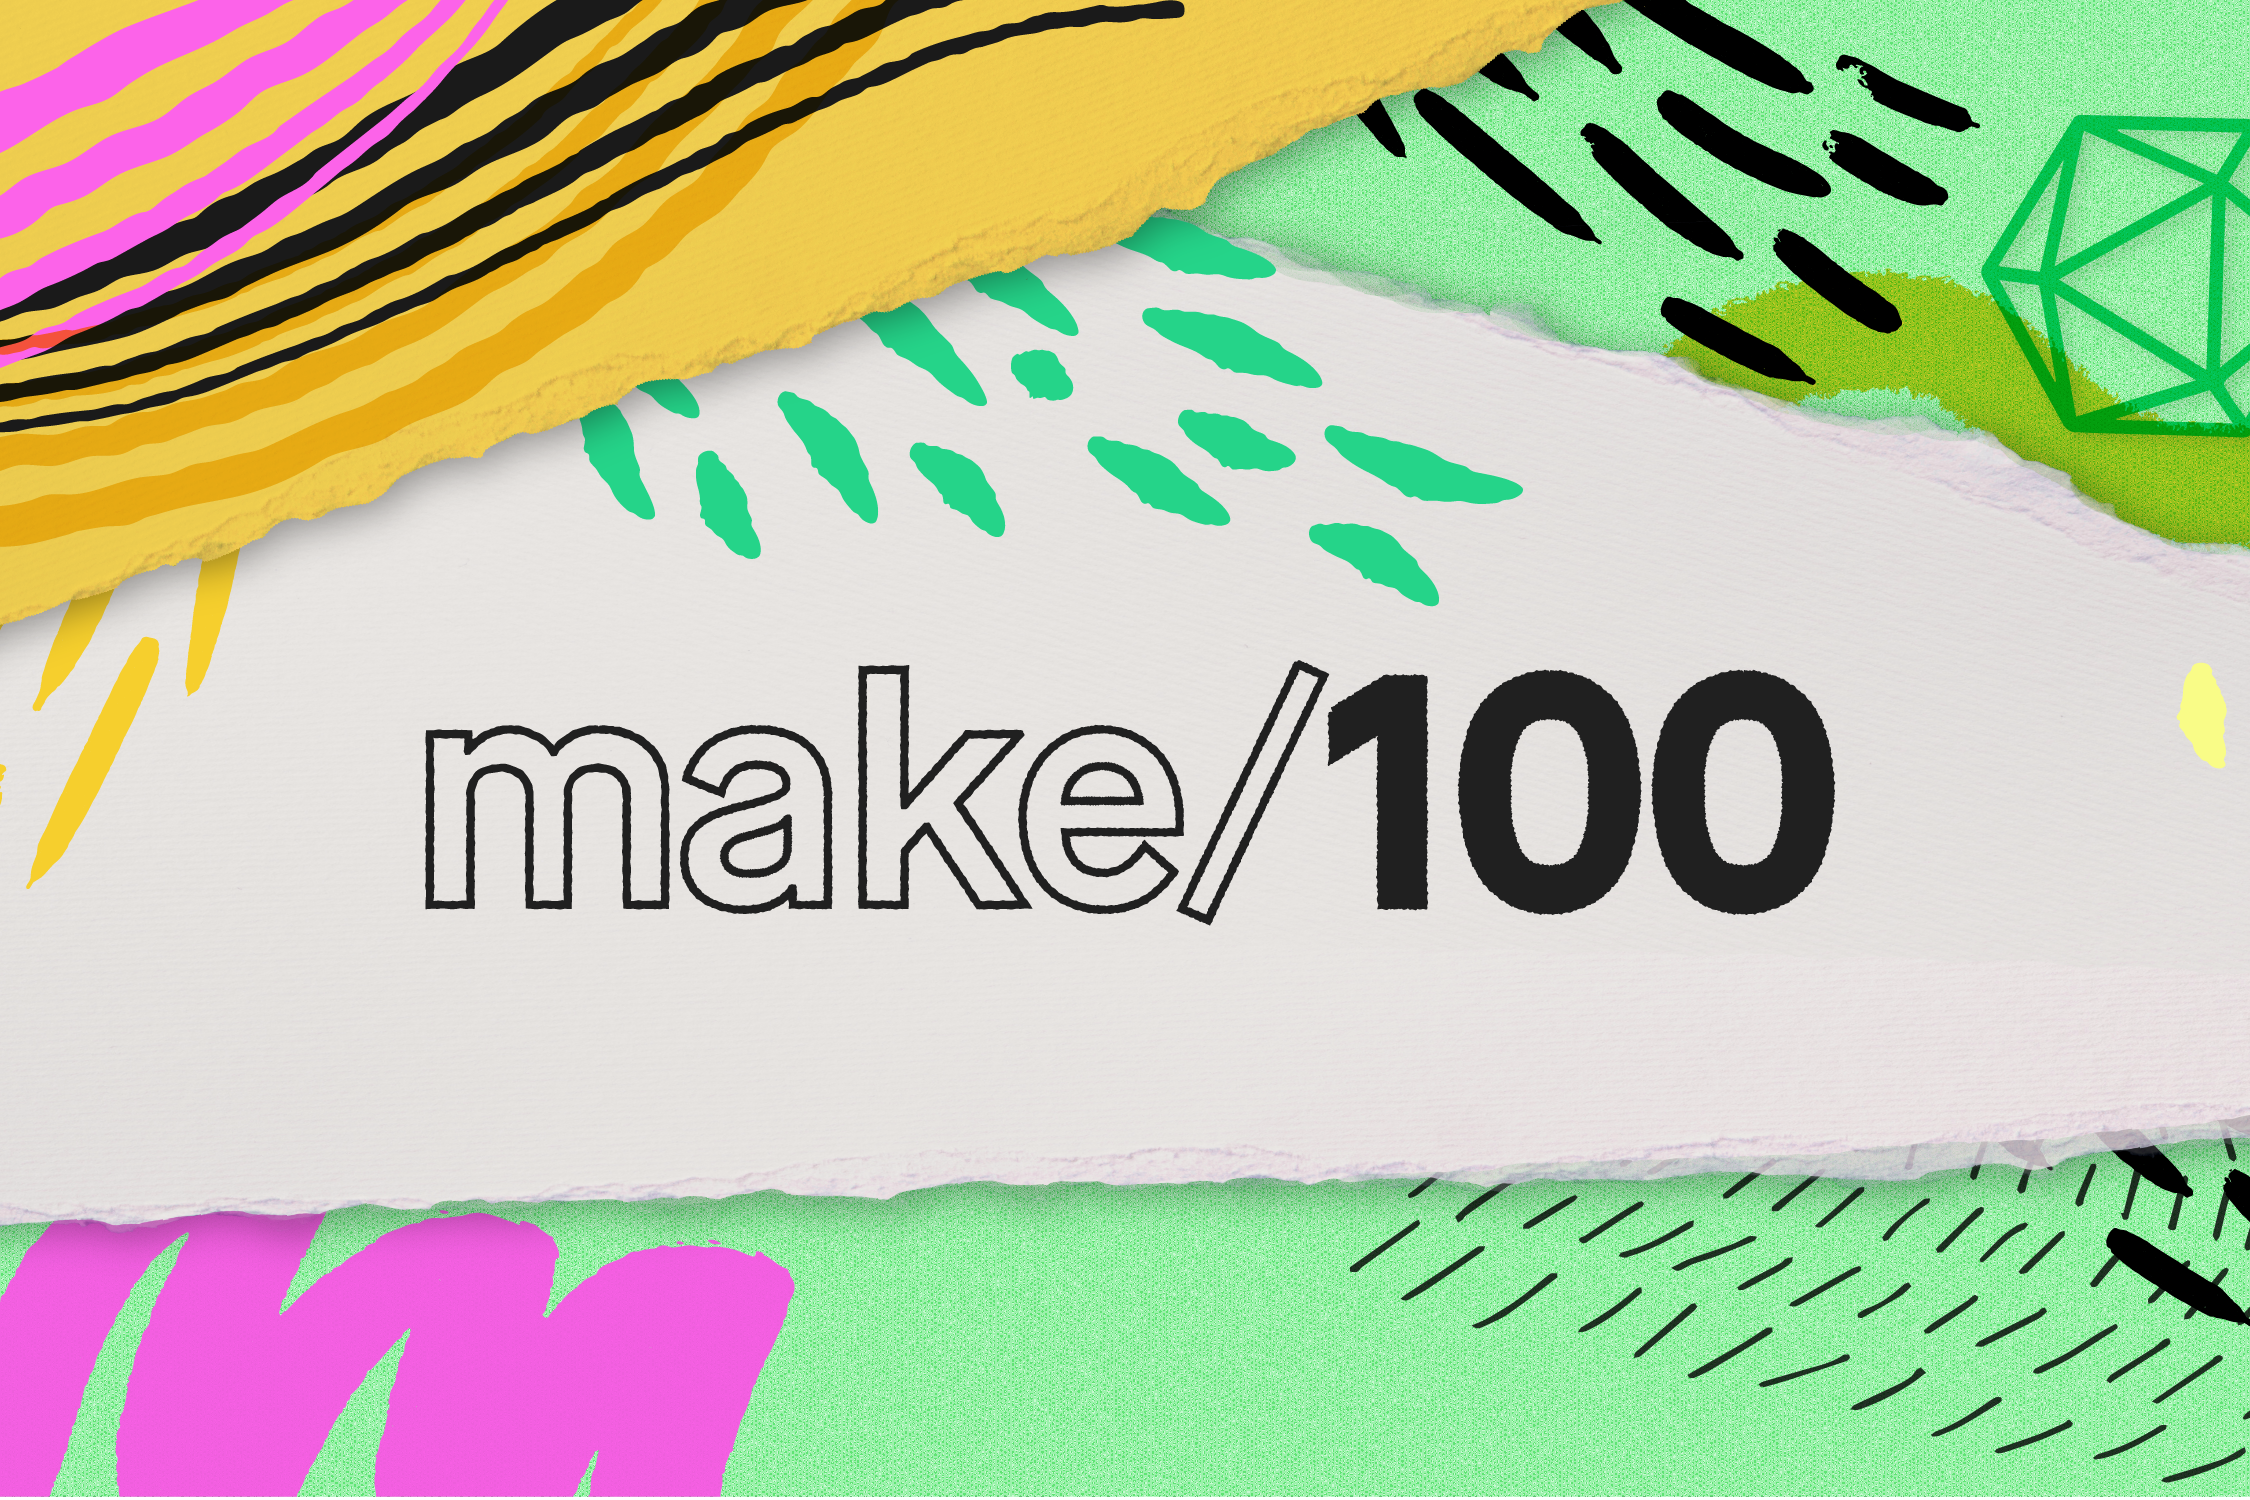 Make 100 Returns! This January, Launch a Kickstarter Project That Offers Exactly 100 Rewards